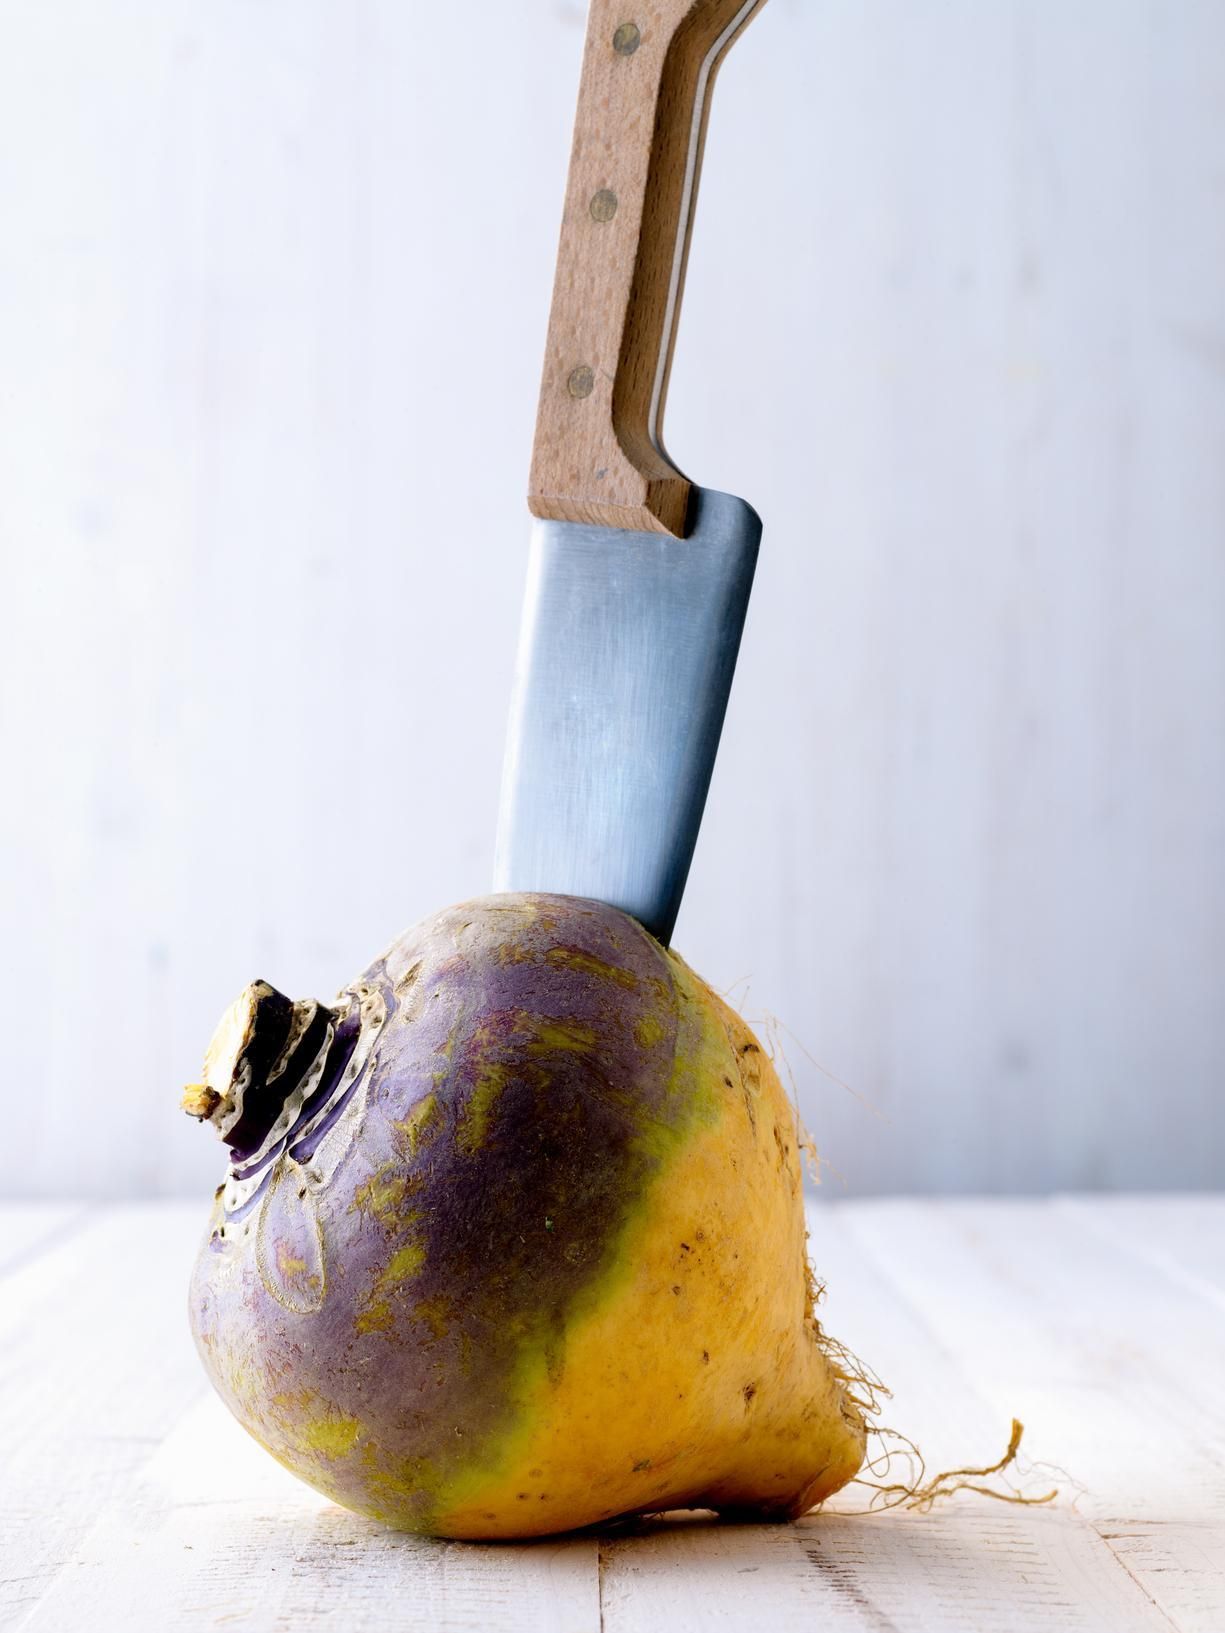 Slicing and dicing data. The turnip represents your data, and the knife represents indexing with brackets, or subsetting functions like subset(). The red-eyed clown holding the knife is just off camera.